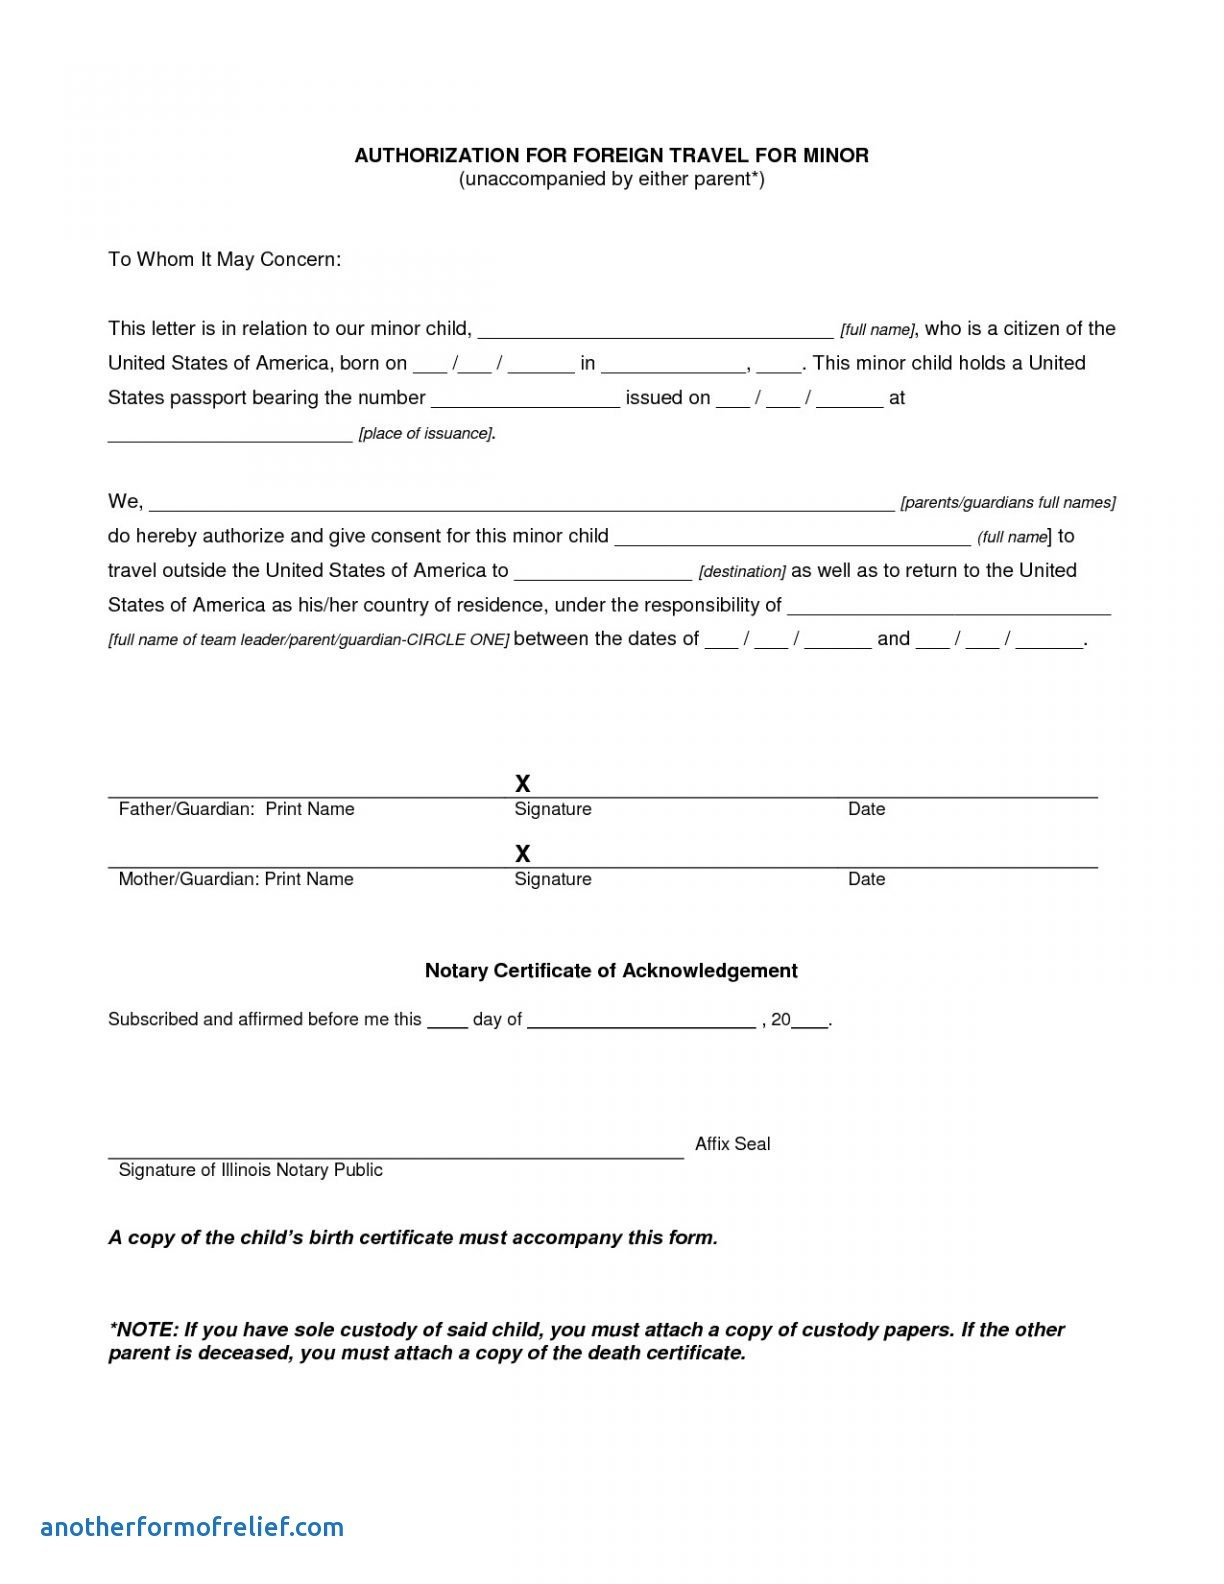 Notarized Letter Template for Child Travel - Permission Letter to Travel Refrence Microsoft Word Consent